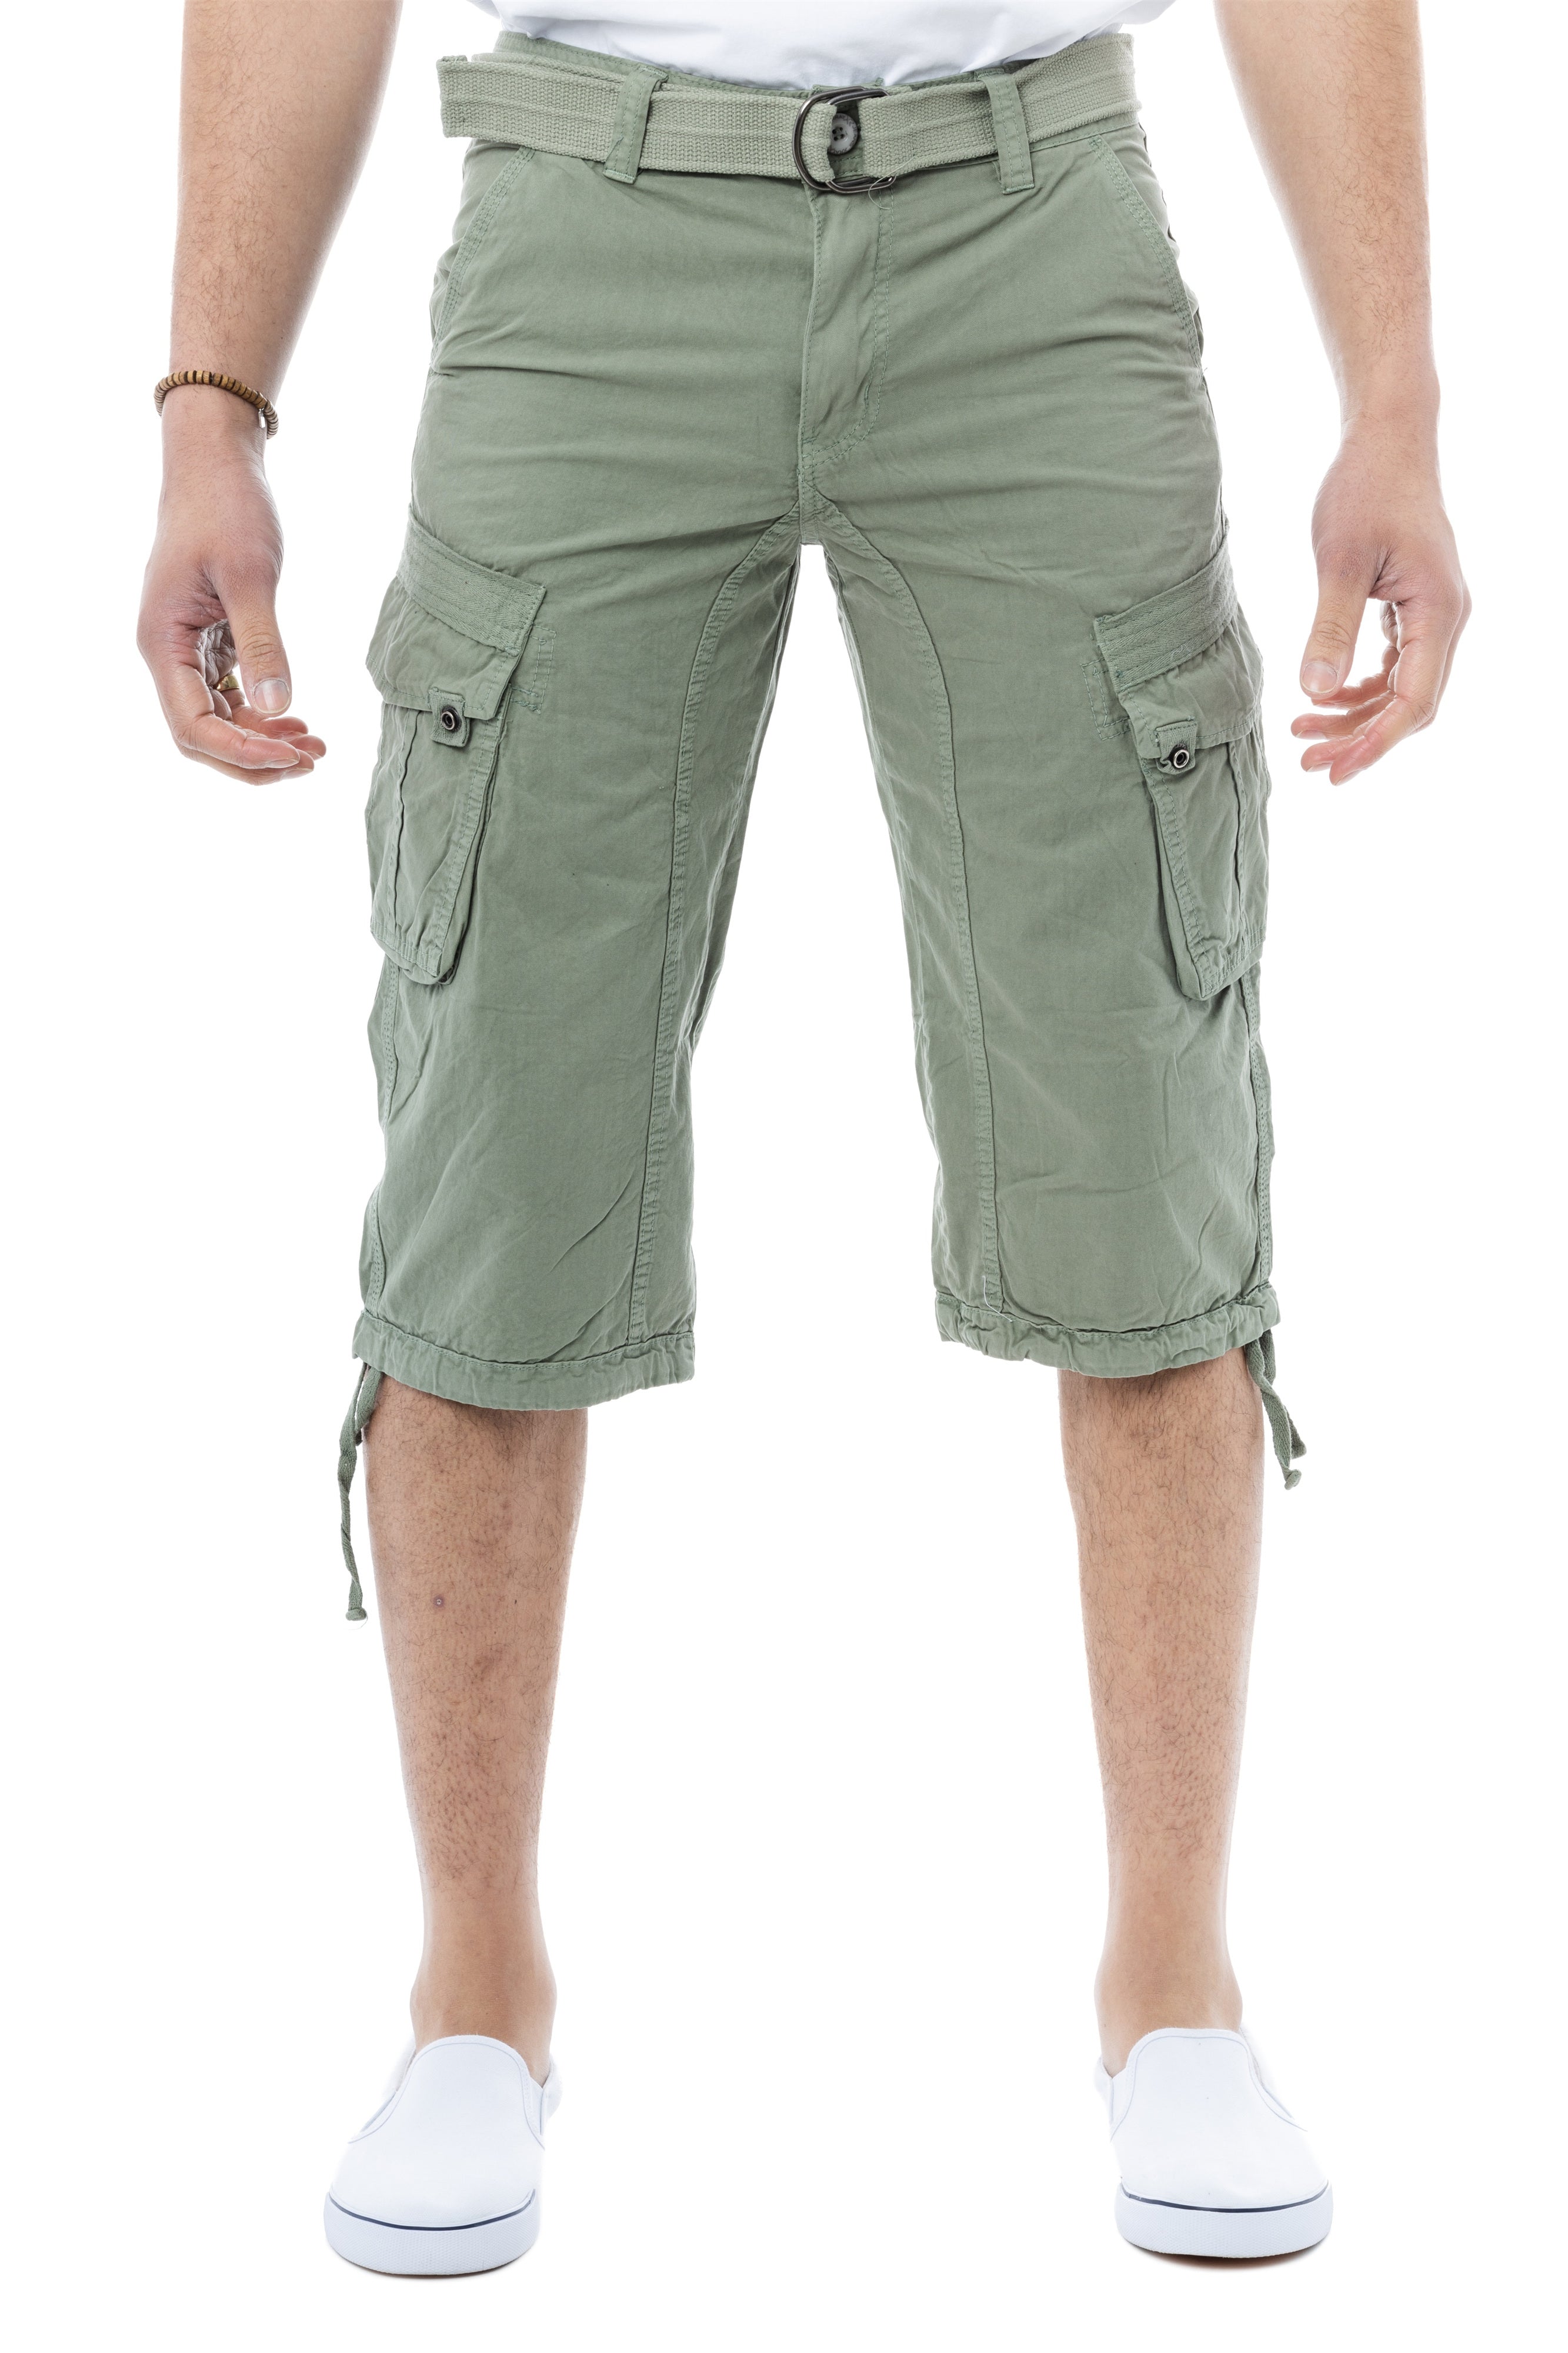 UNIQLO Malaysia - MEN Roll Up 3/4 Cargo Pants Retails at RM 79.90 (U.P. RM  129.90) Get it at: http://s.uniqlo.com/2gDBzoB Limited offer from 16-22 Dec  | Facebook